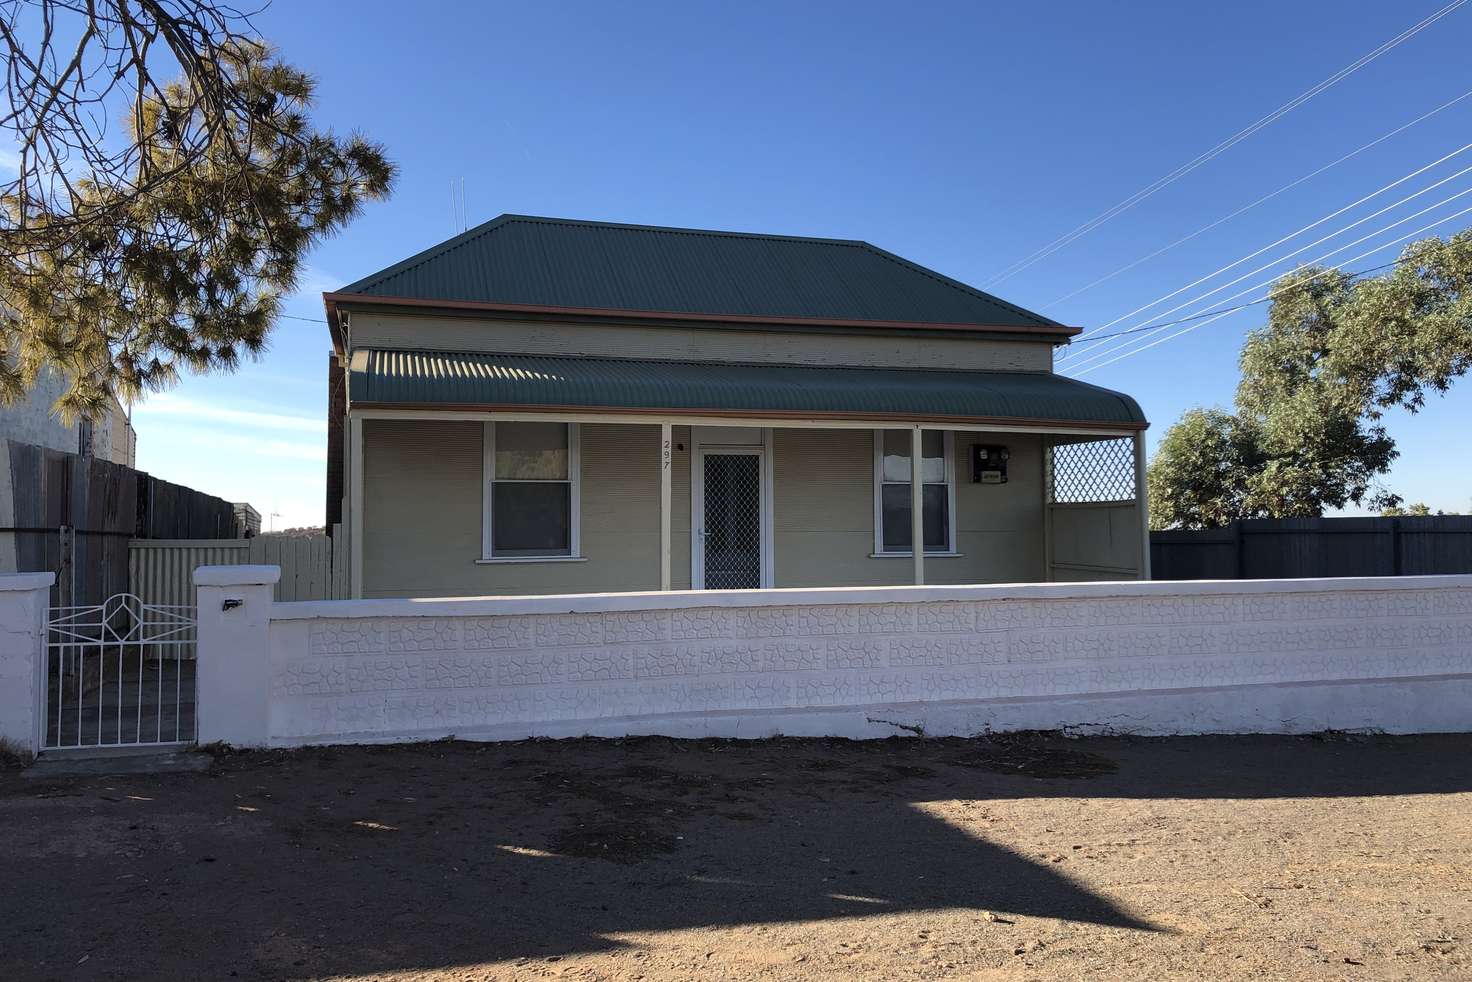 Main view of Homely house listing, 297 Patton St, Broken Hill NSW 2880